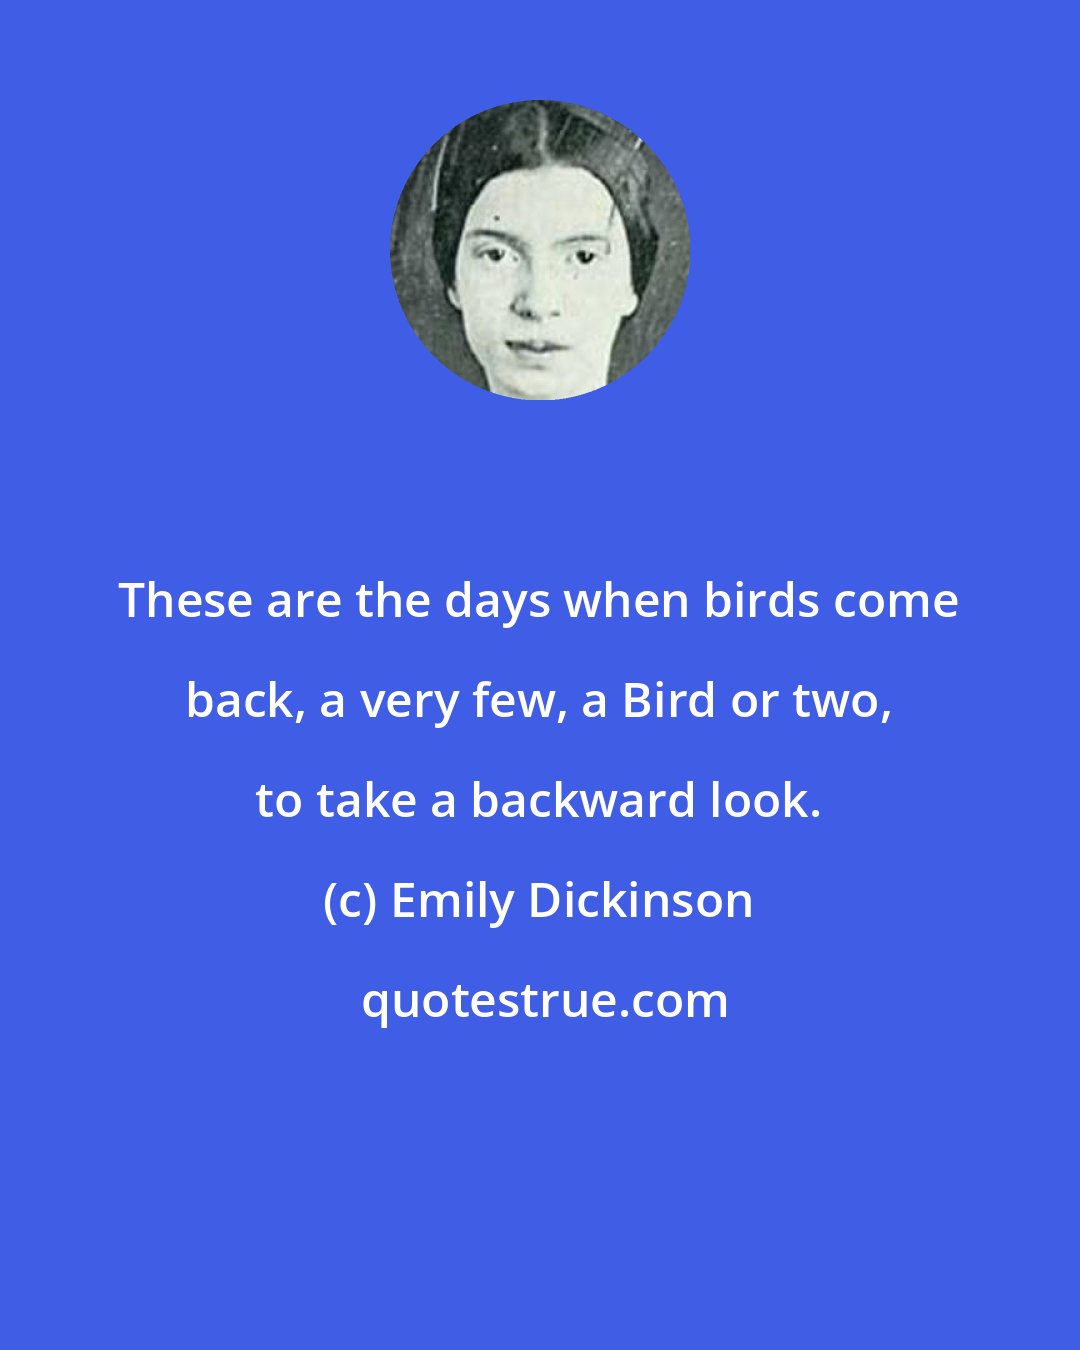 Emily Dickinson: These are the days when birds come back, a very few, a Bird or two, to take a backward look.